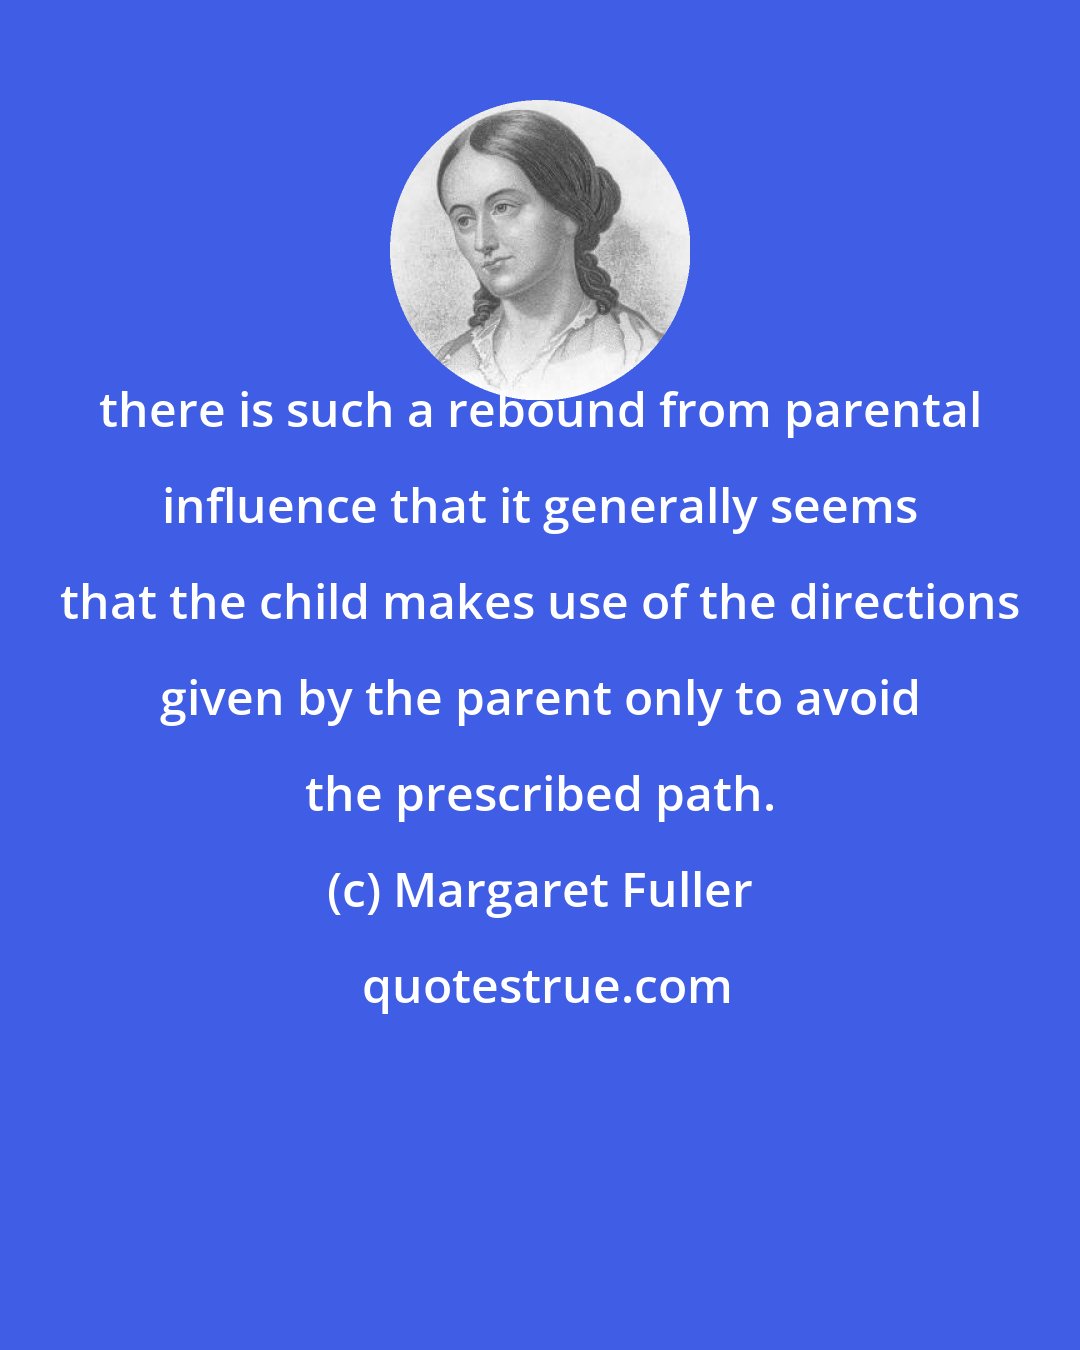 Margaret Fuller: there is such a rebound from parental influence that it generally seems that the child makes use of the directions given by the parent only to avoid the prescribed path.